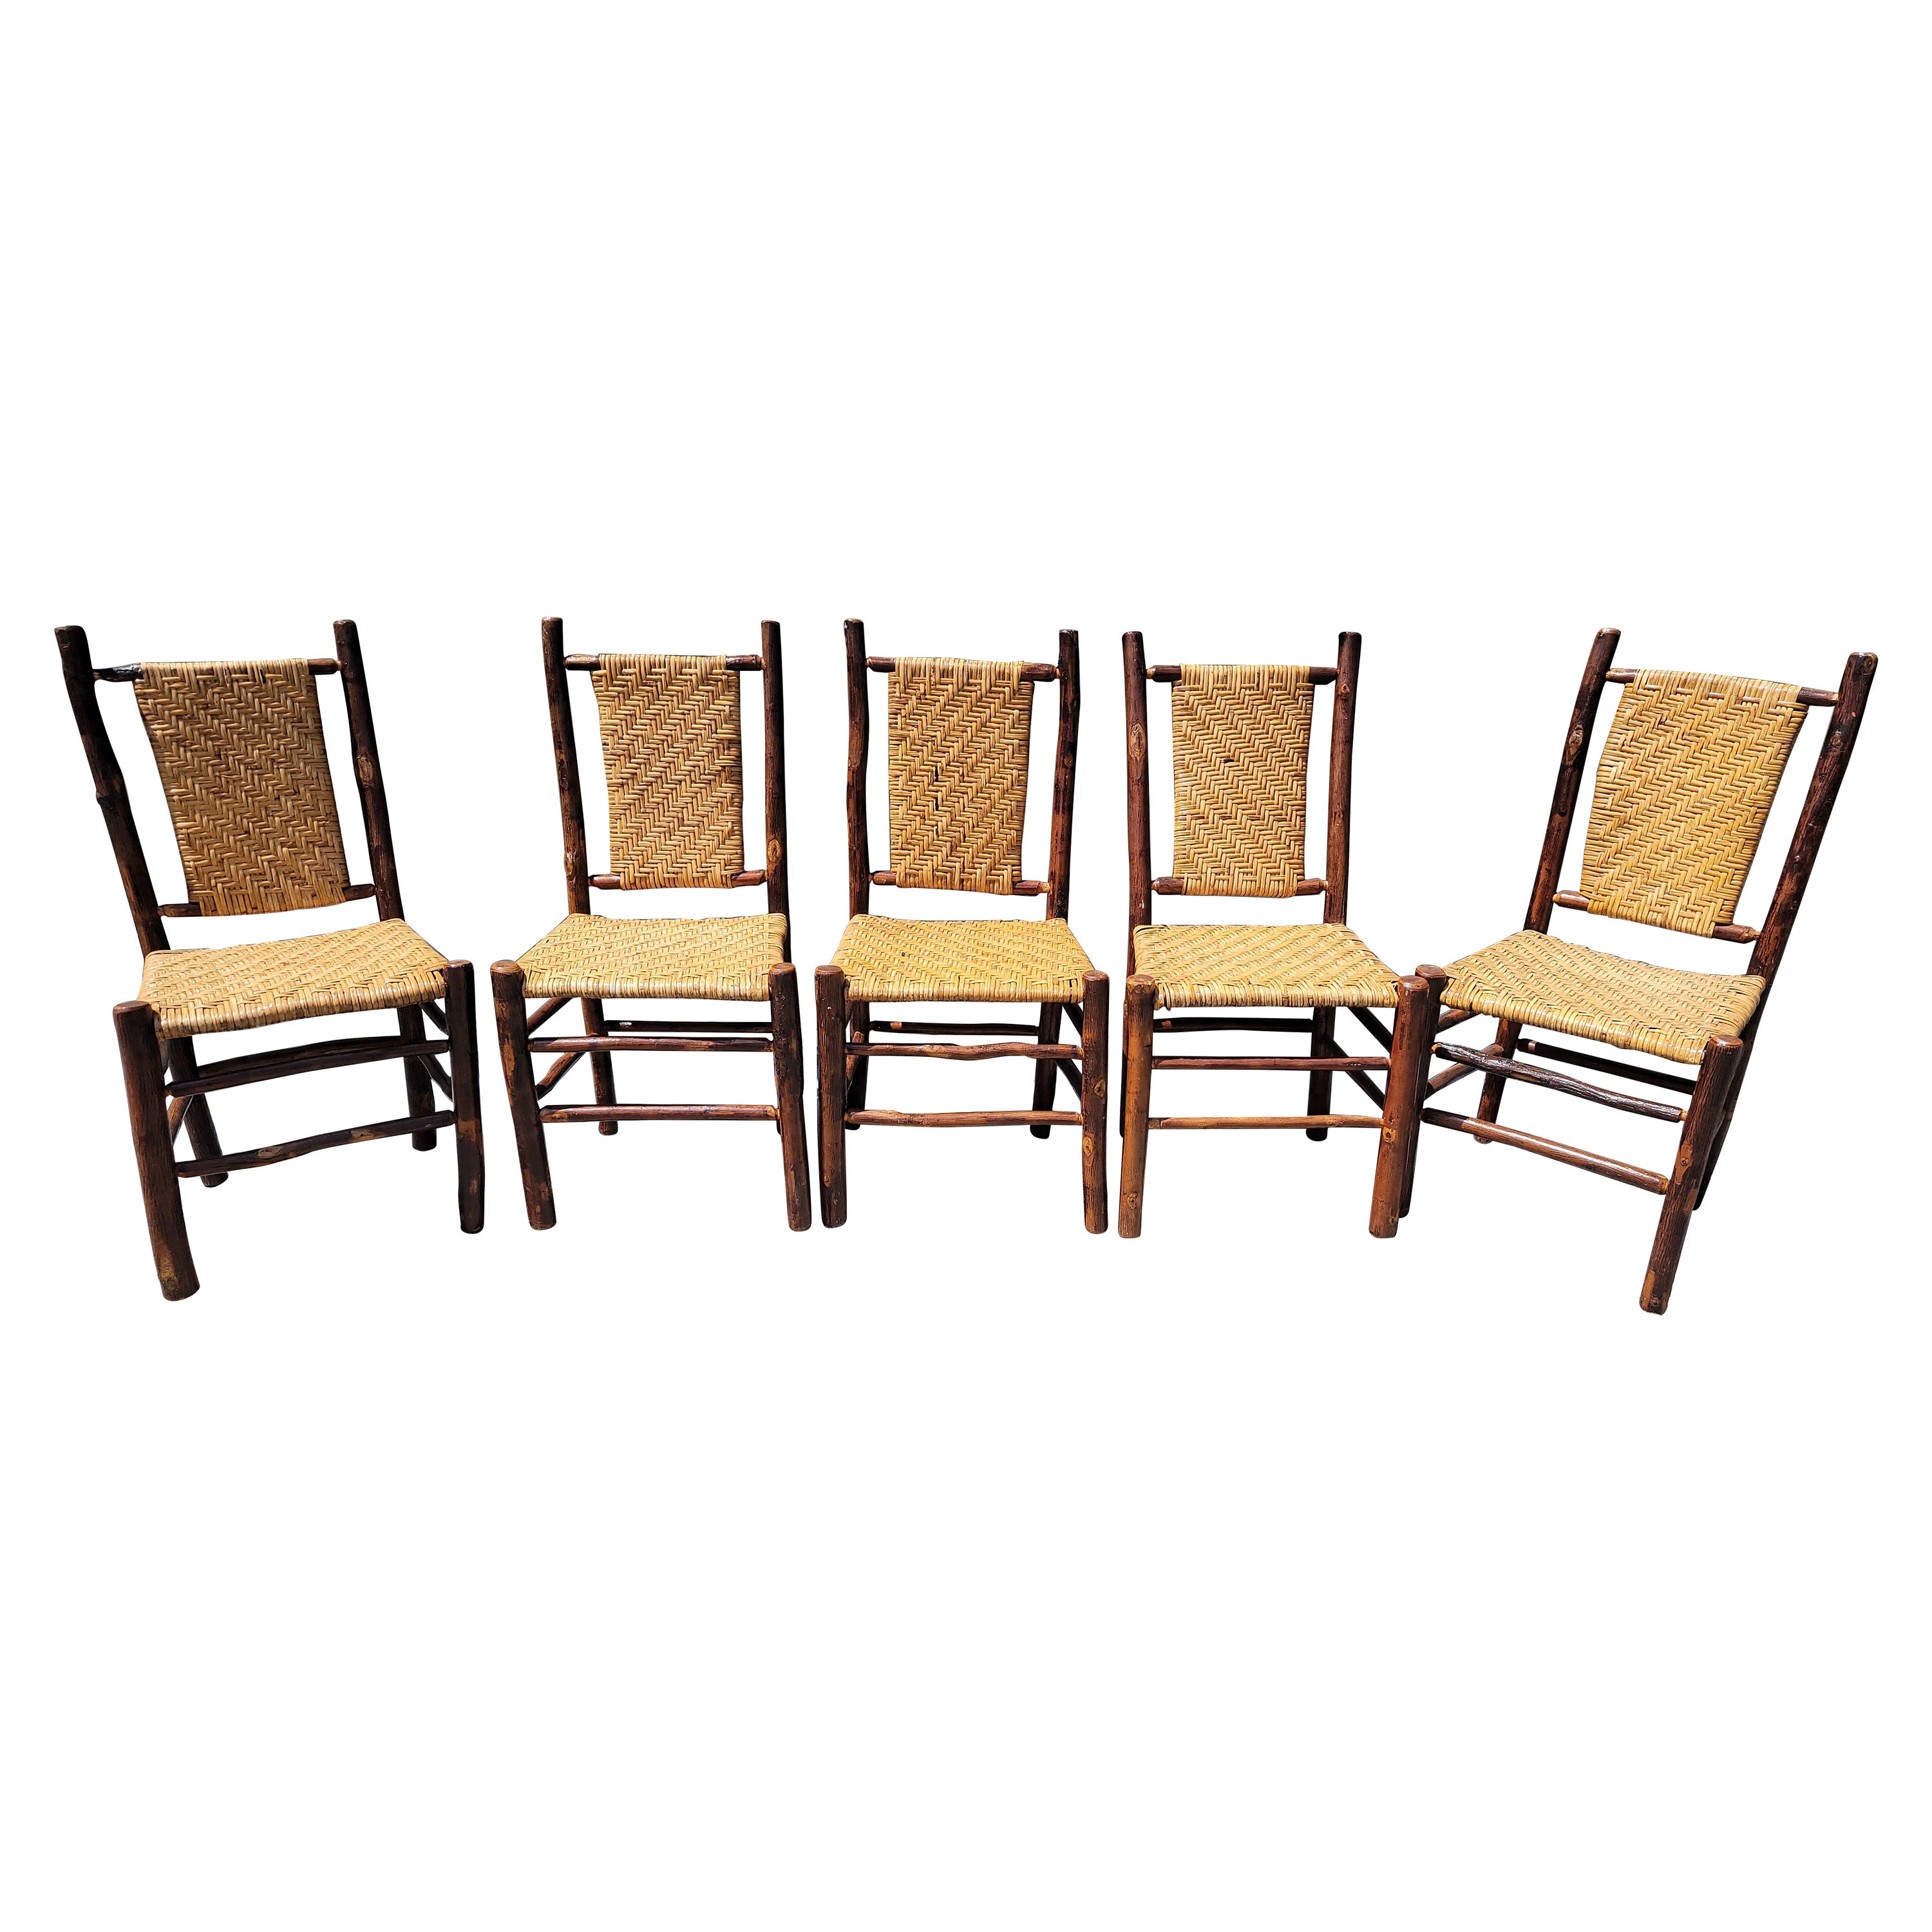 Set of Five Matching Signed Old Hickory Chairs -5